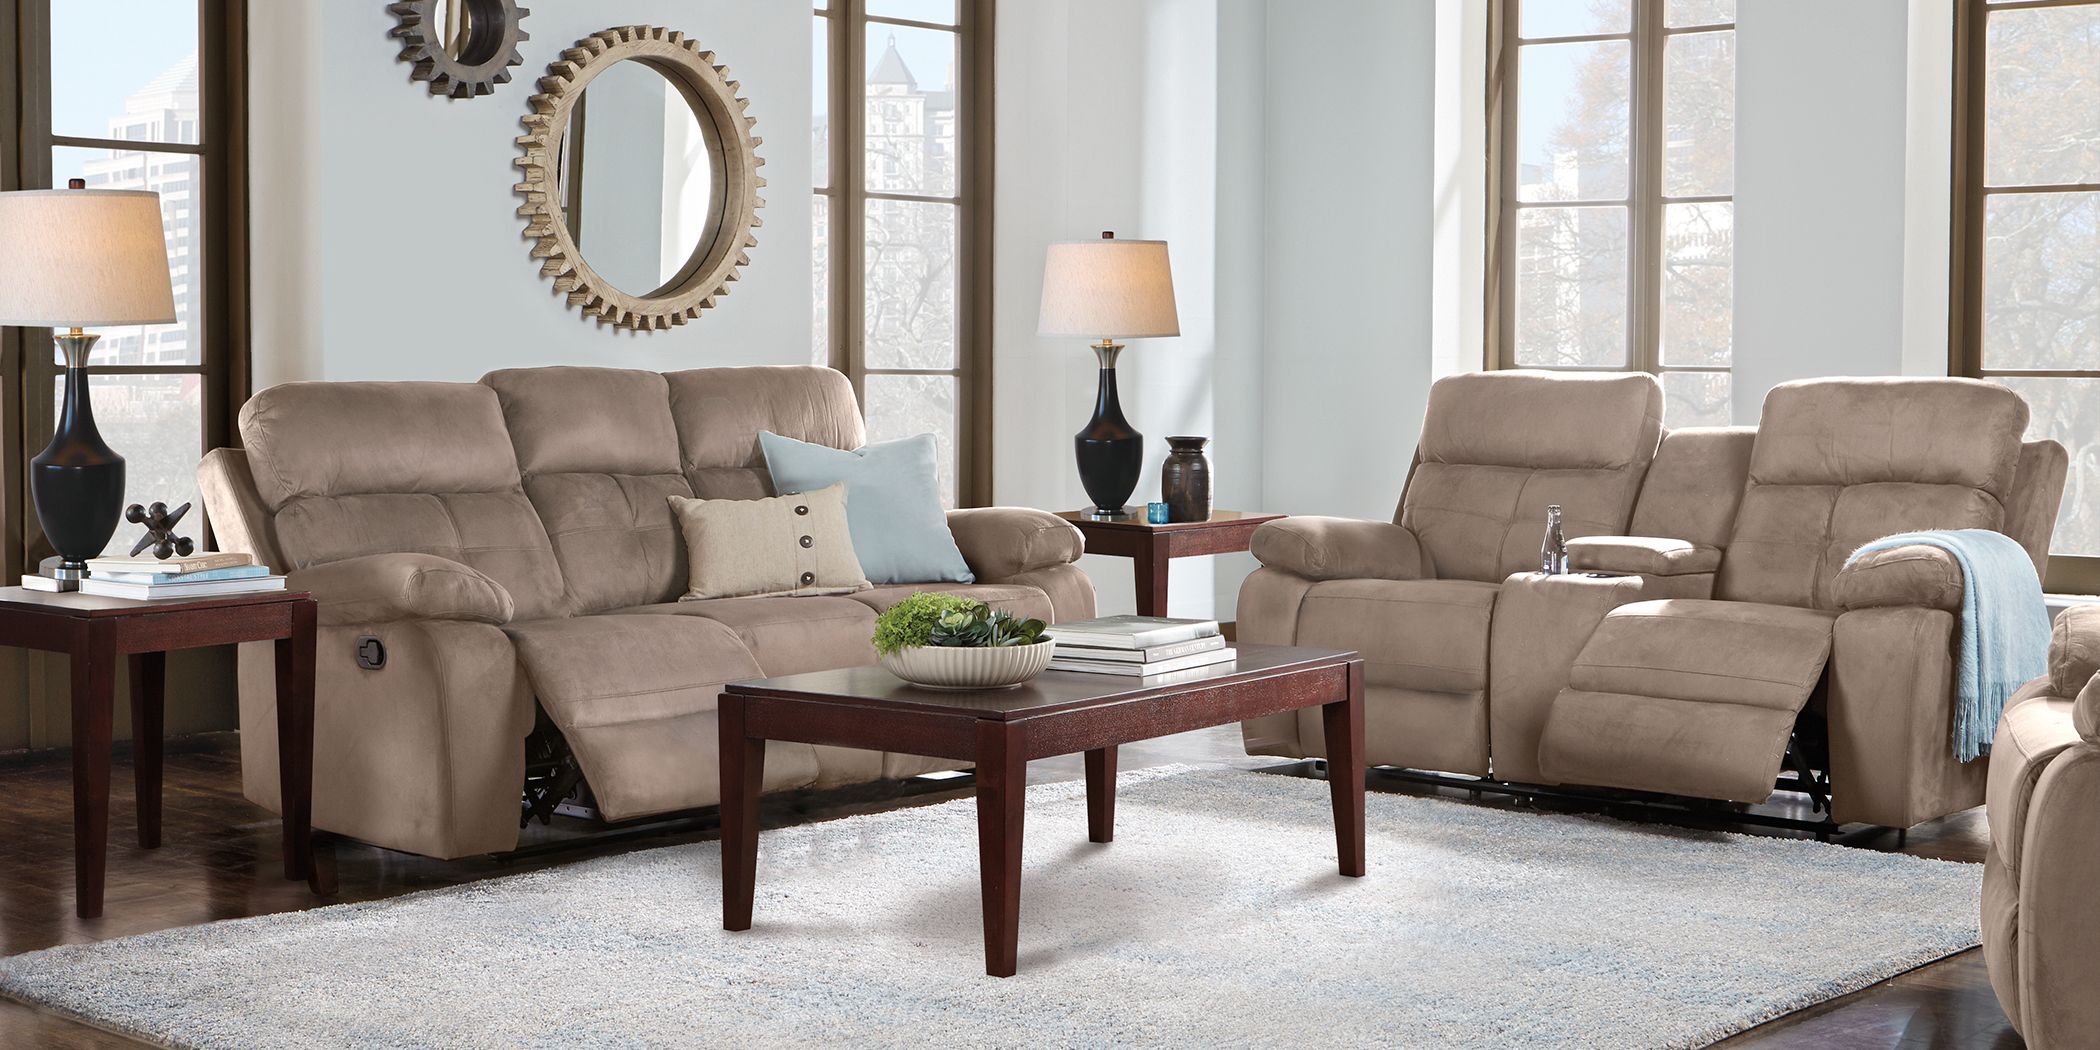 Corinne Stone 5 Pc Living Room with Reclining Sofa - Rooms To Go